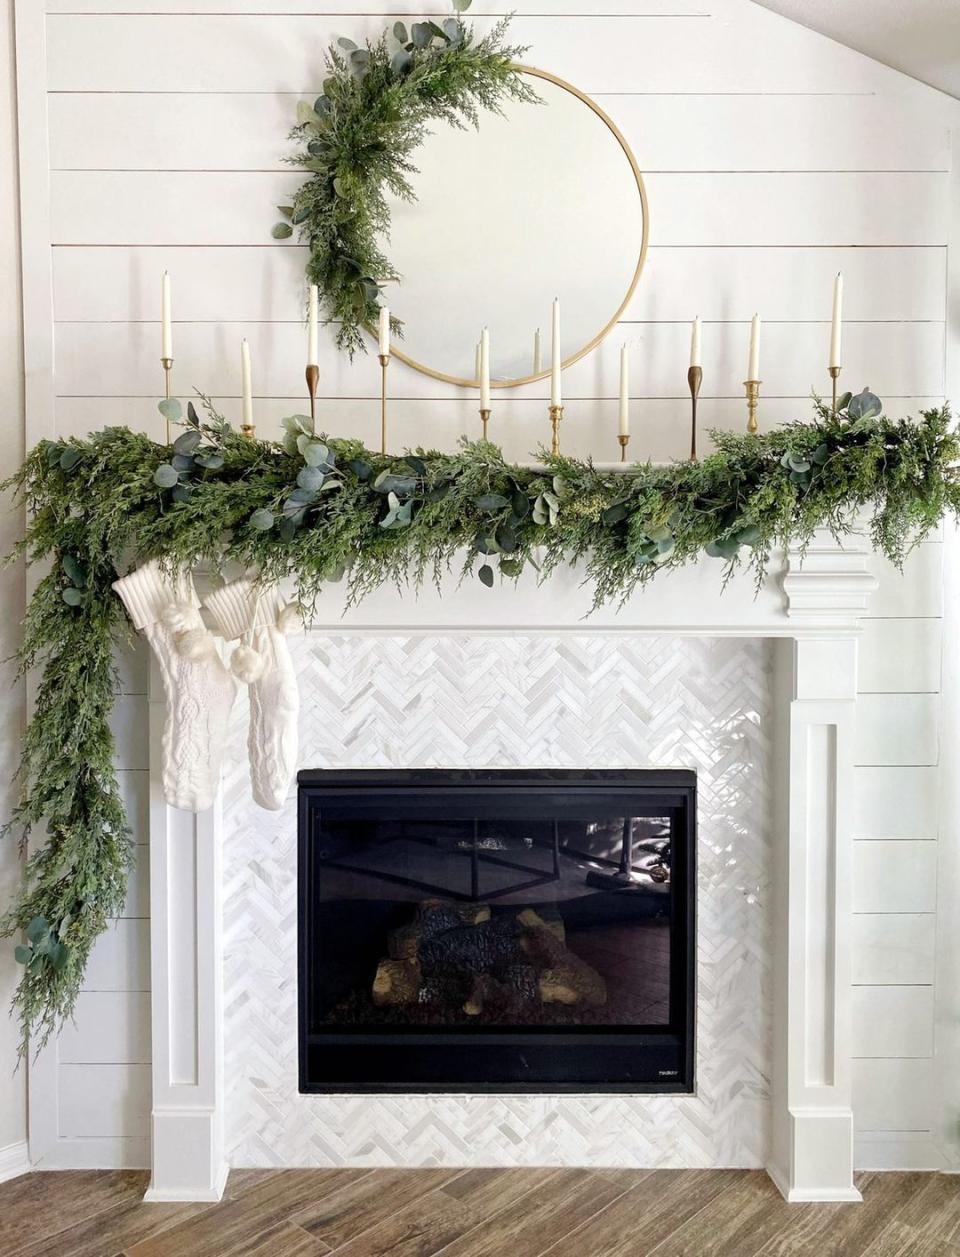 Go Asymmetrical With Your Garland